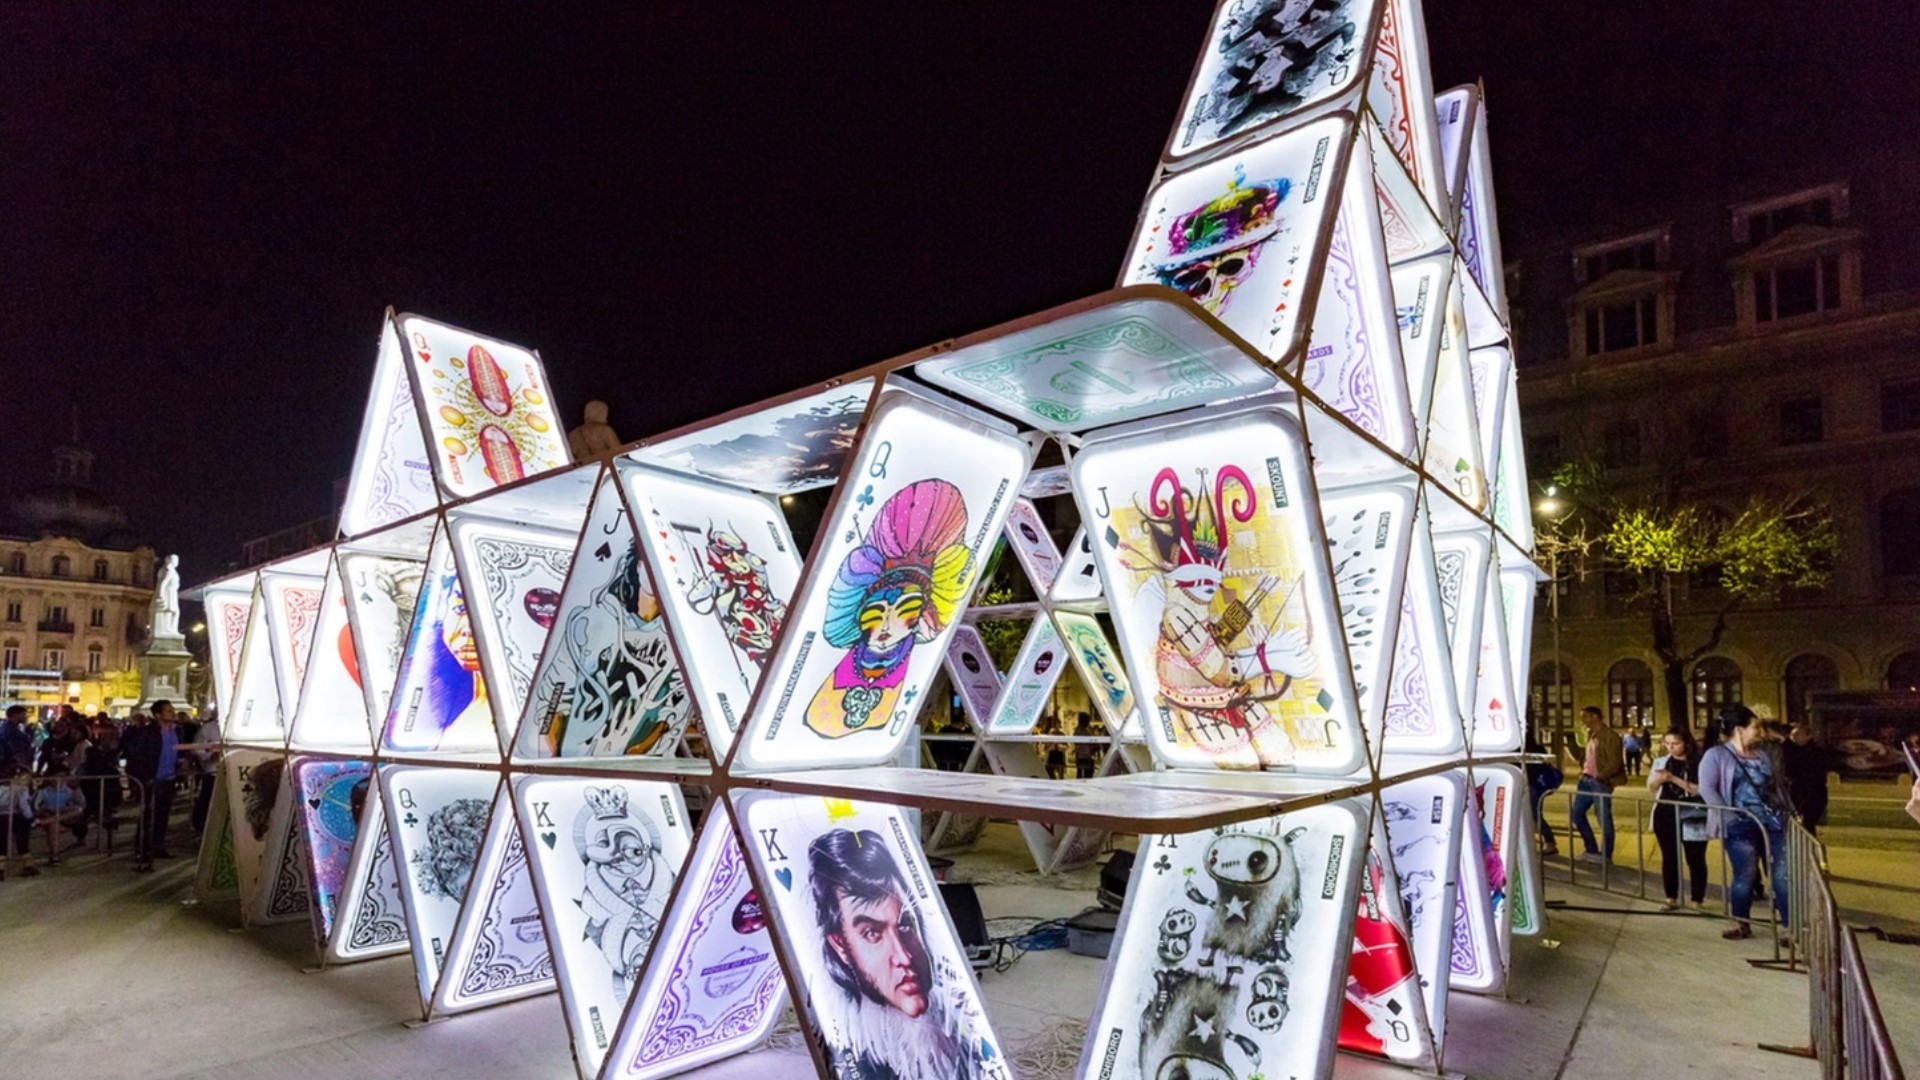 The World of Winter kicks off Friday with dozens of outdoor art installations and two full months of events.